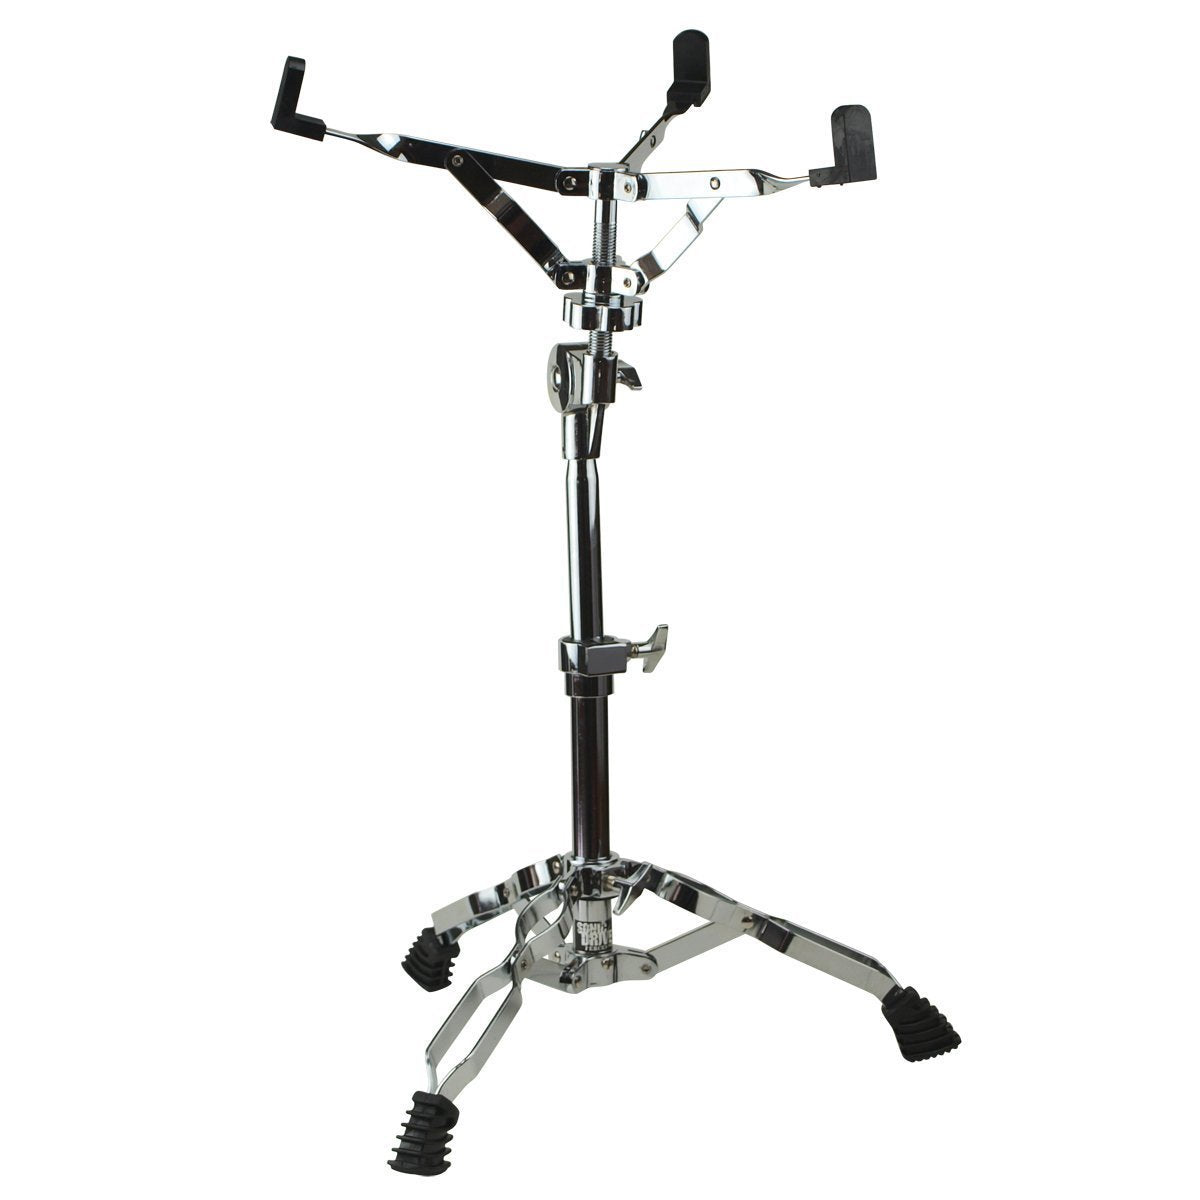 Sonic Drive Deluxe Snare Drum Stand